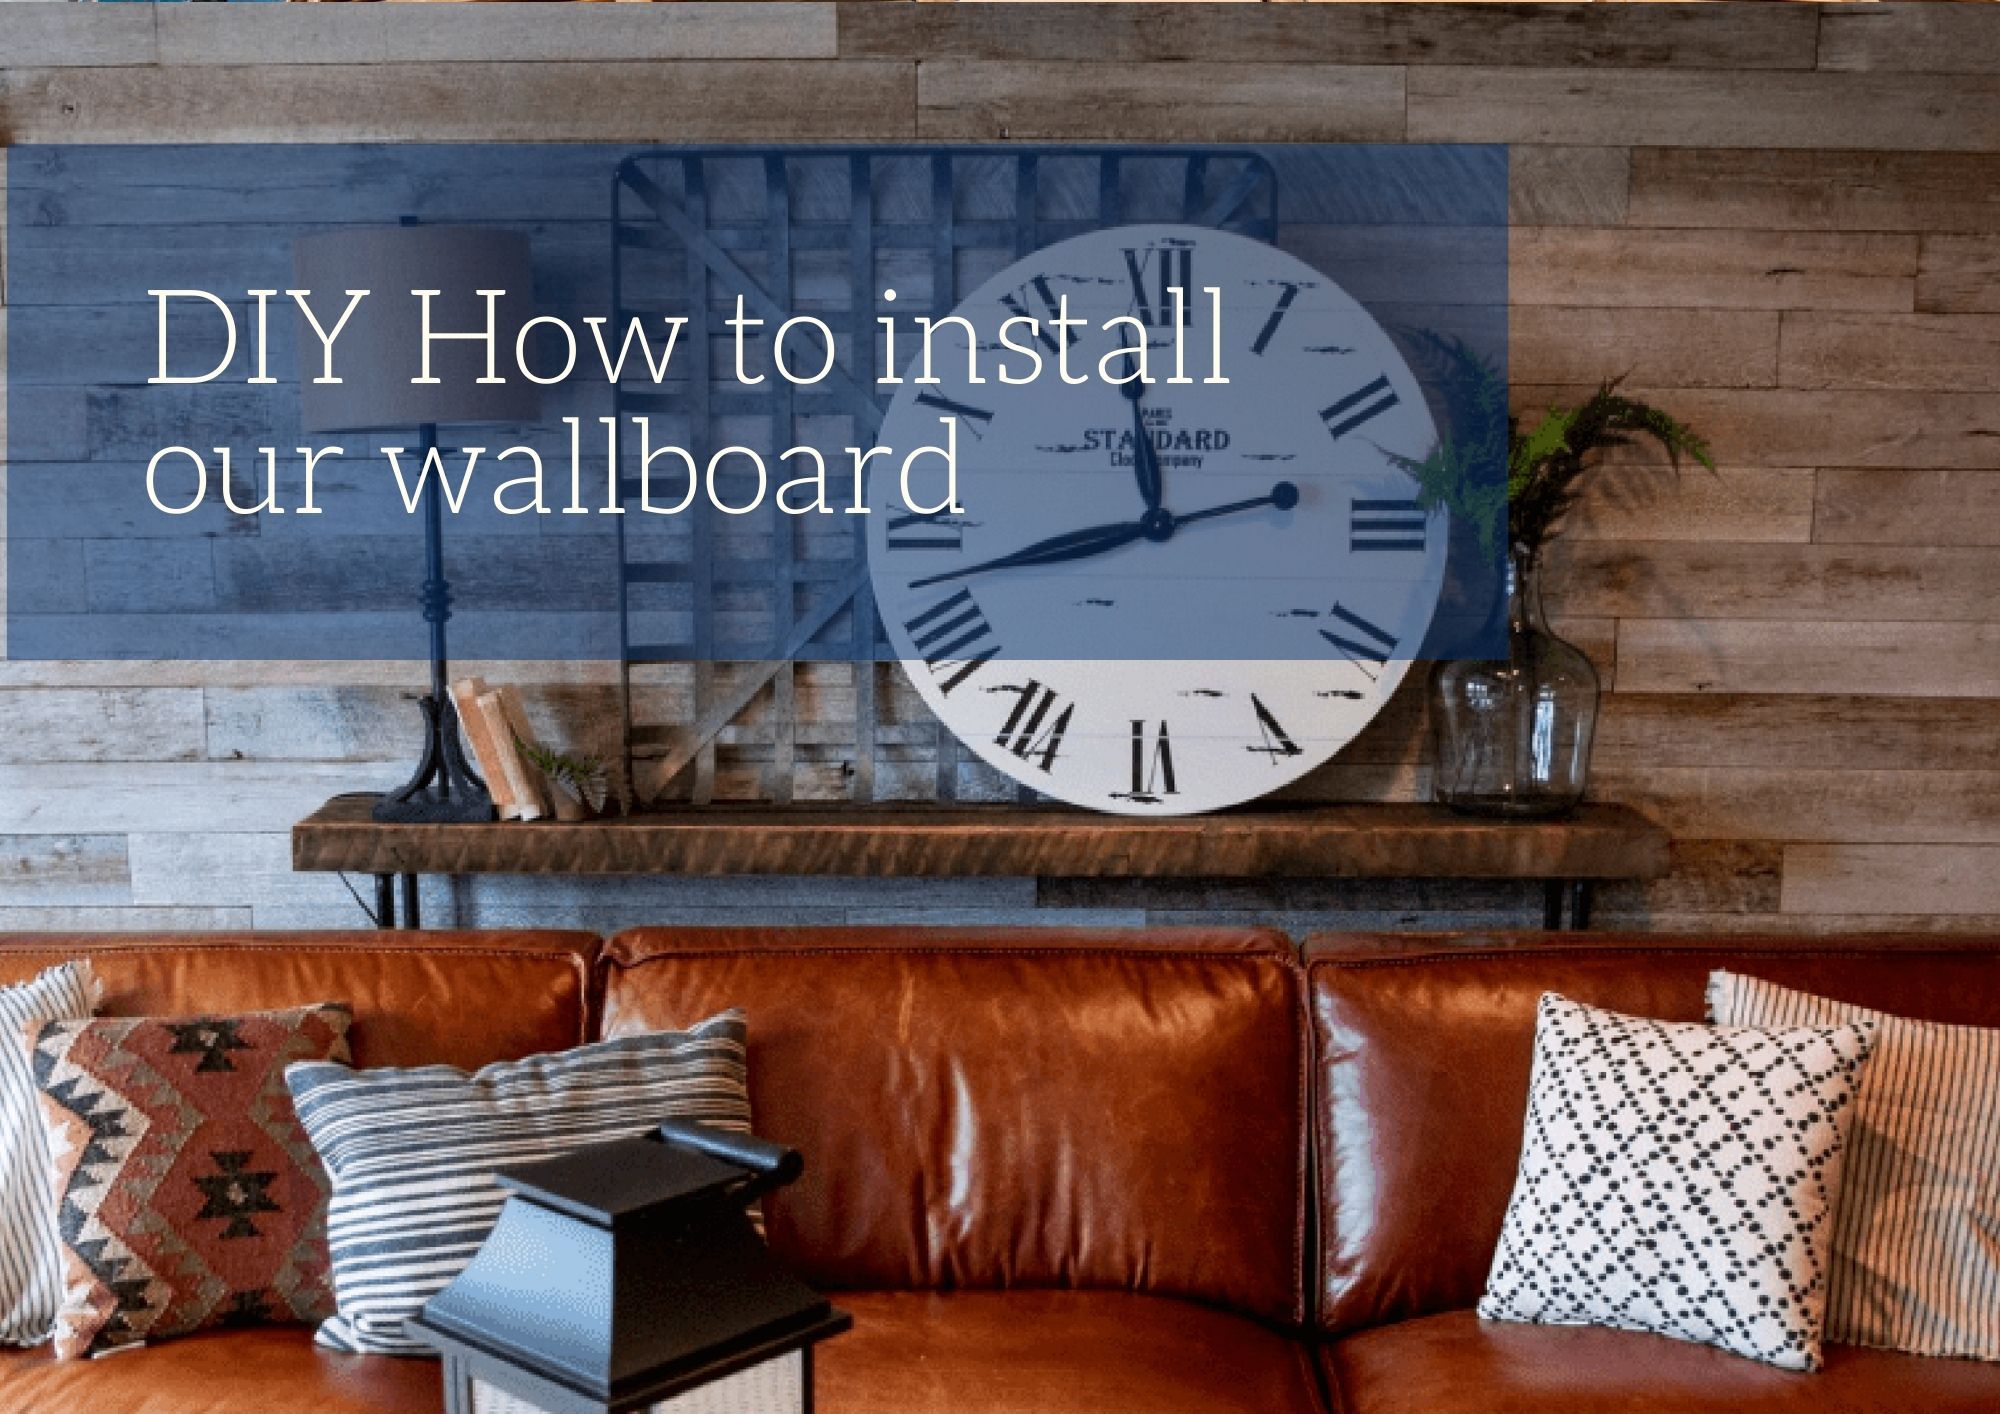 DIY: How to install our wallboard